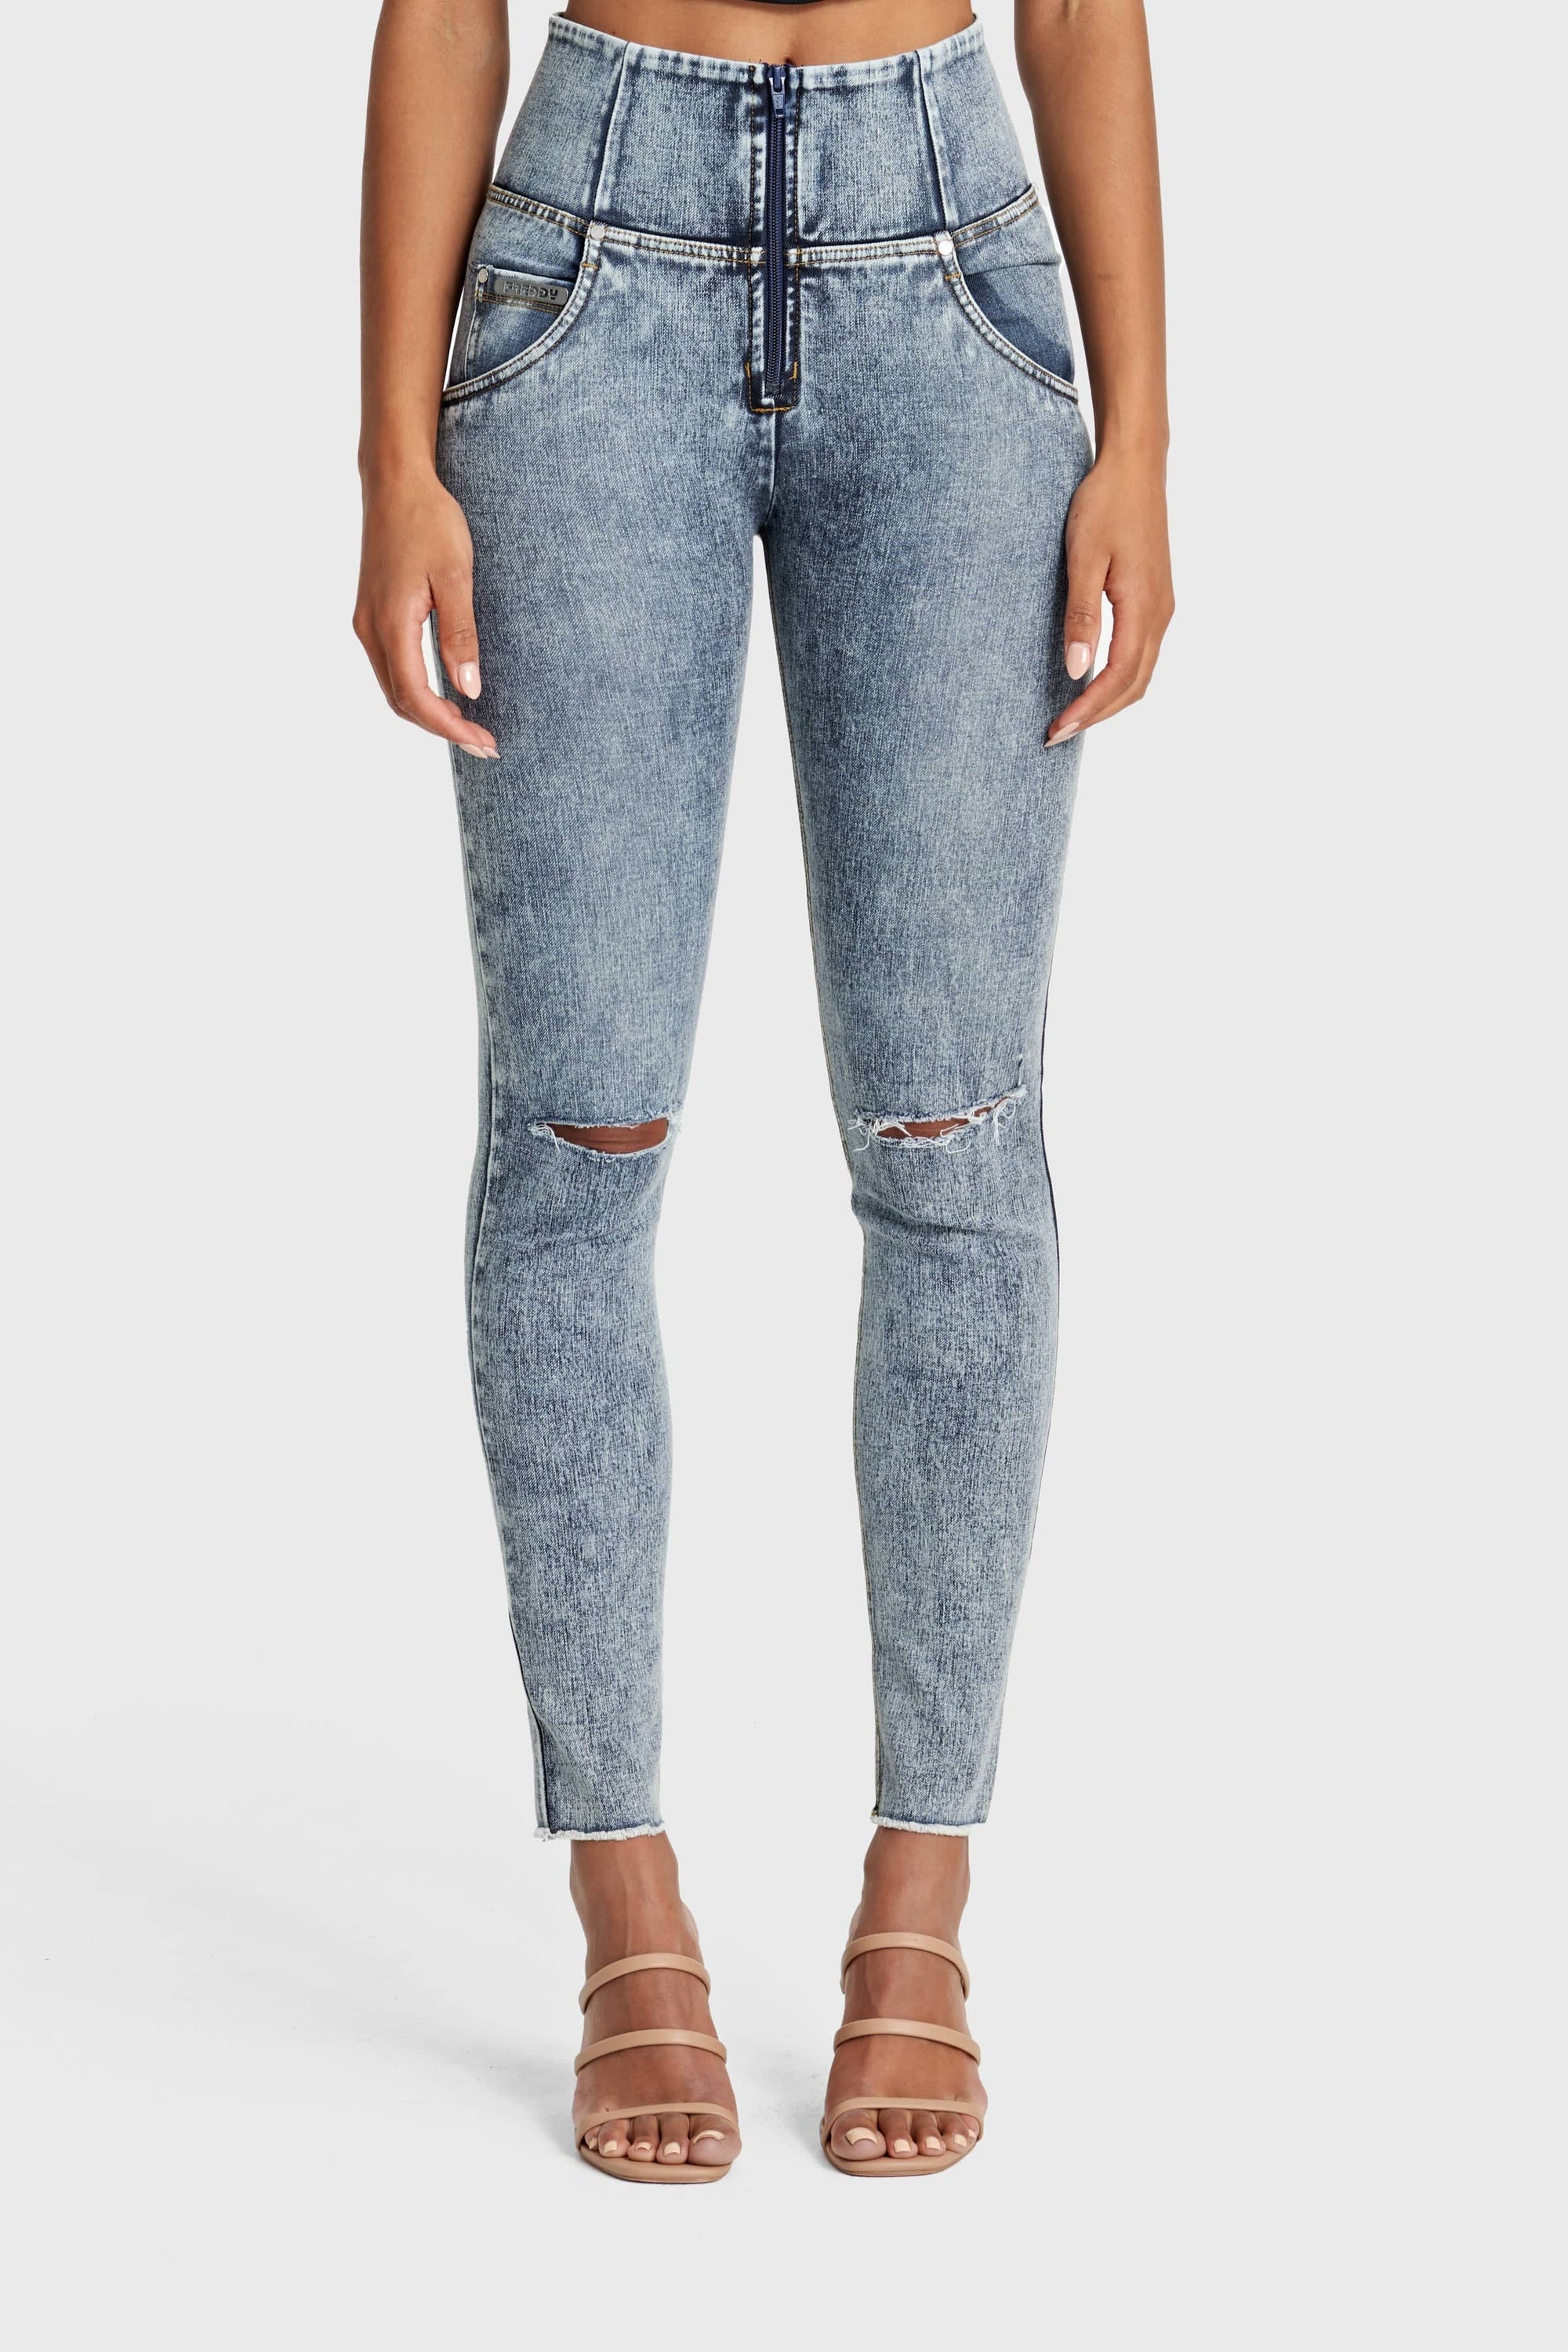 WR.UP® Snug Ripped Jeans - High Waisted - Full Length - Blue Stonewash + Yellow Stitching 8